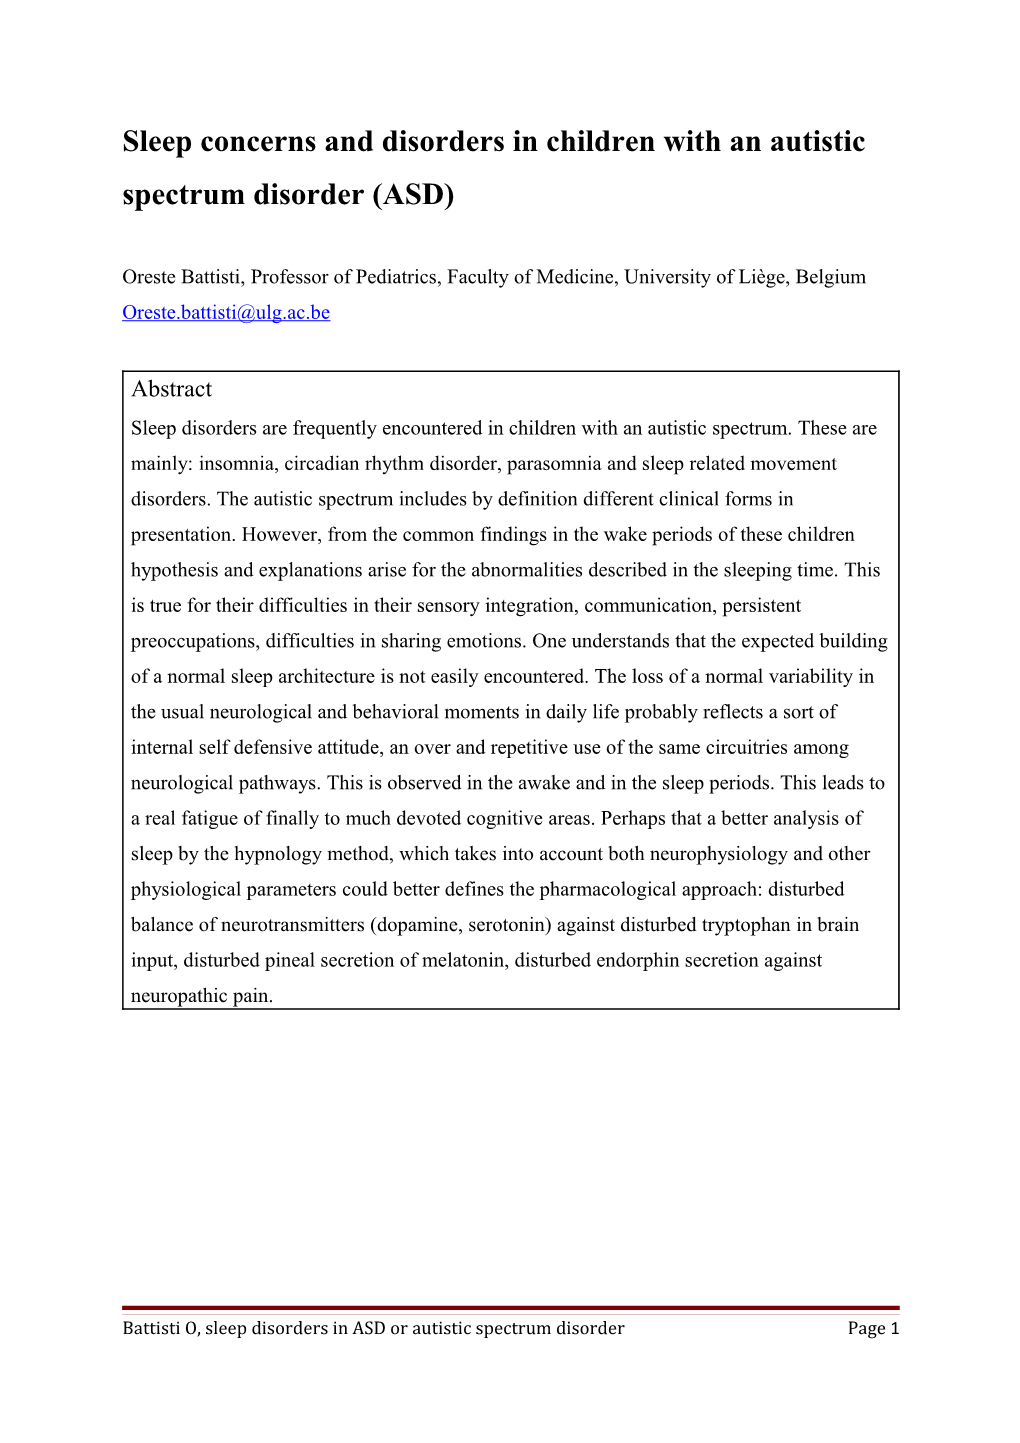 Sleep Disorders in Children with an Autistic Spectrum